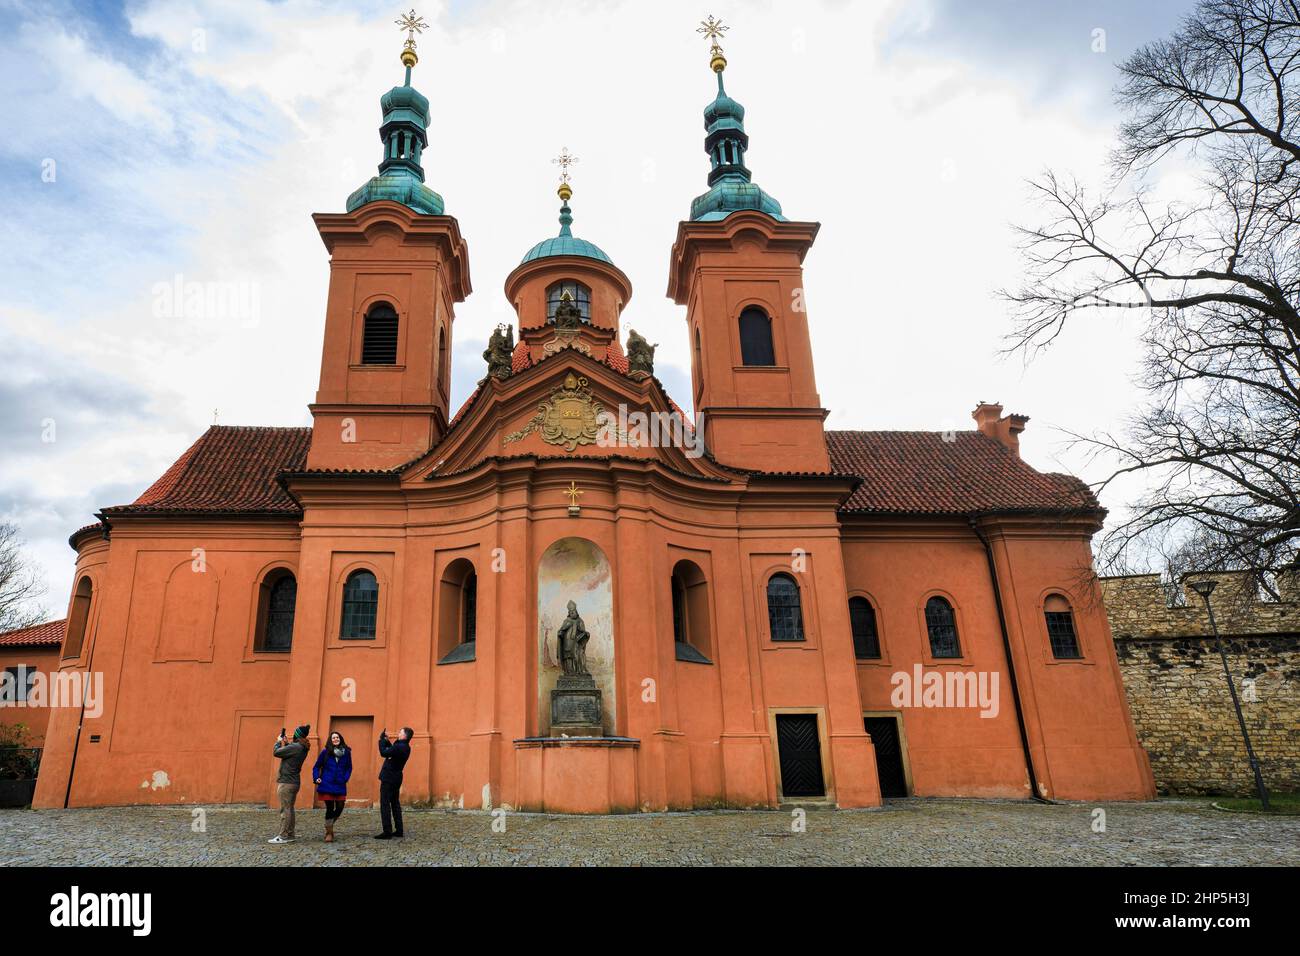 Tourists taking photographs of Church of Saint Vavrinec or St Lawrence with orange facade and twin green cupolas, Petrin Hill, Prague Czech republic Stock Photo